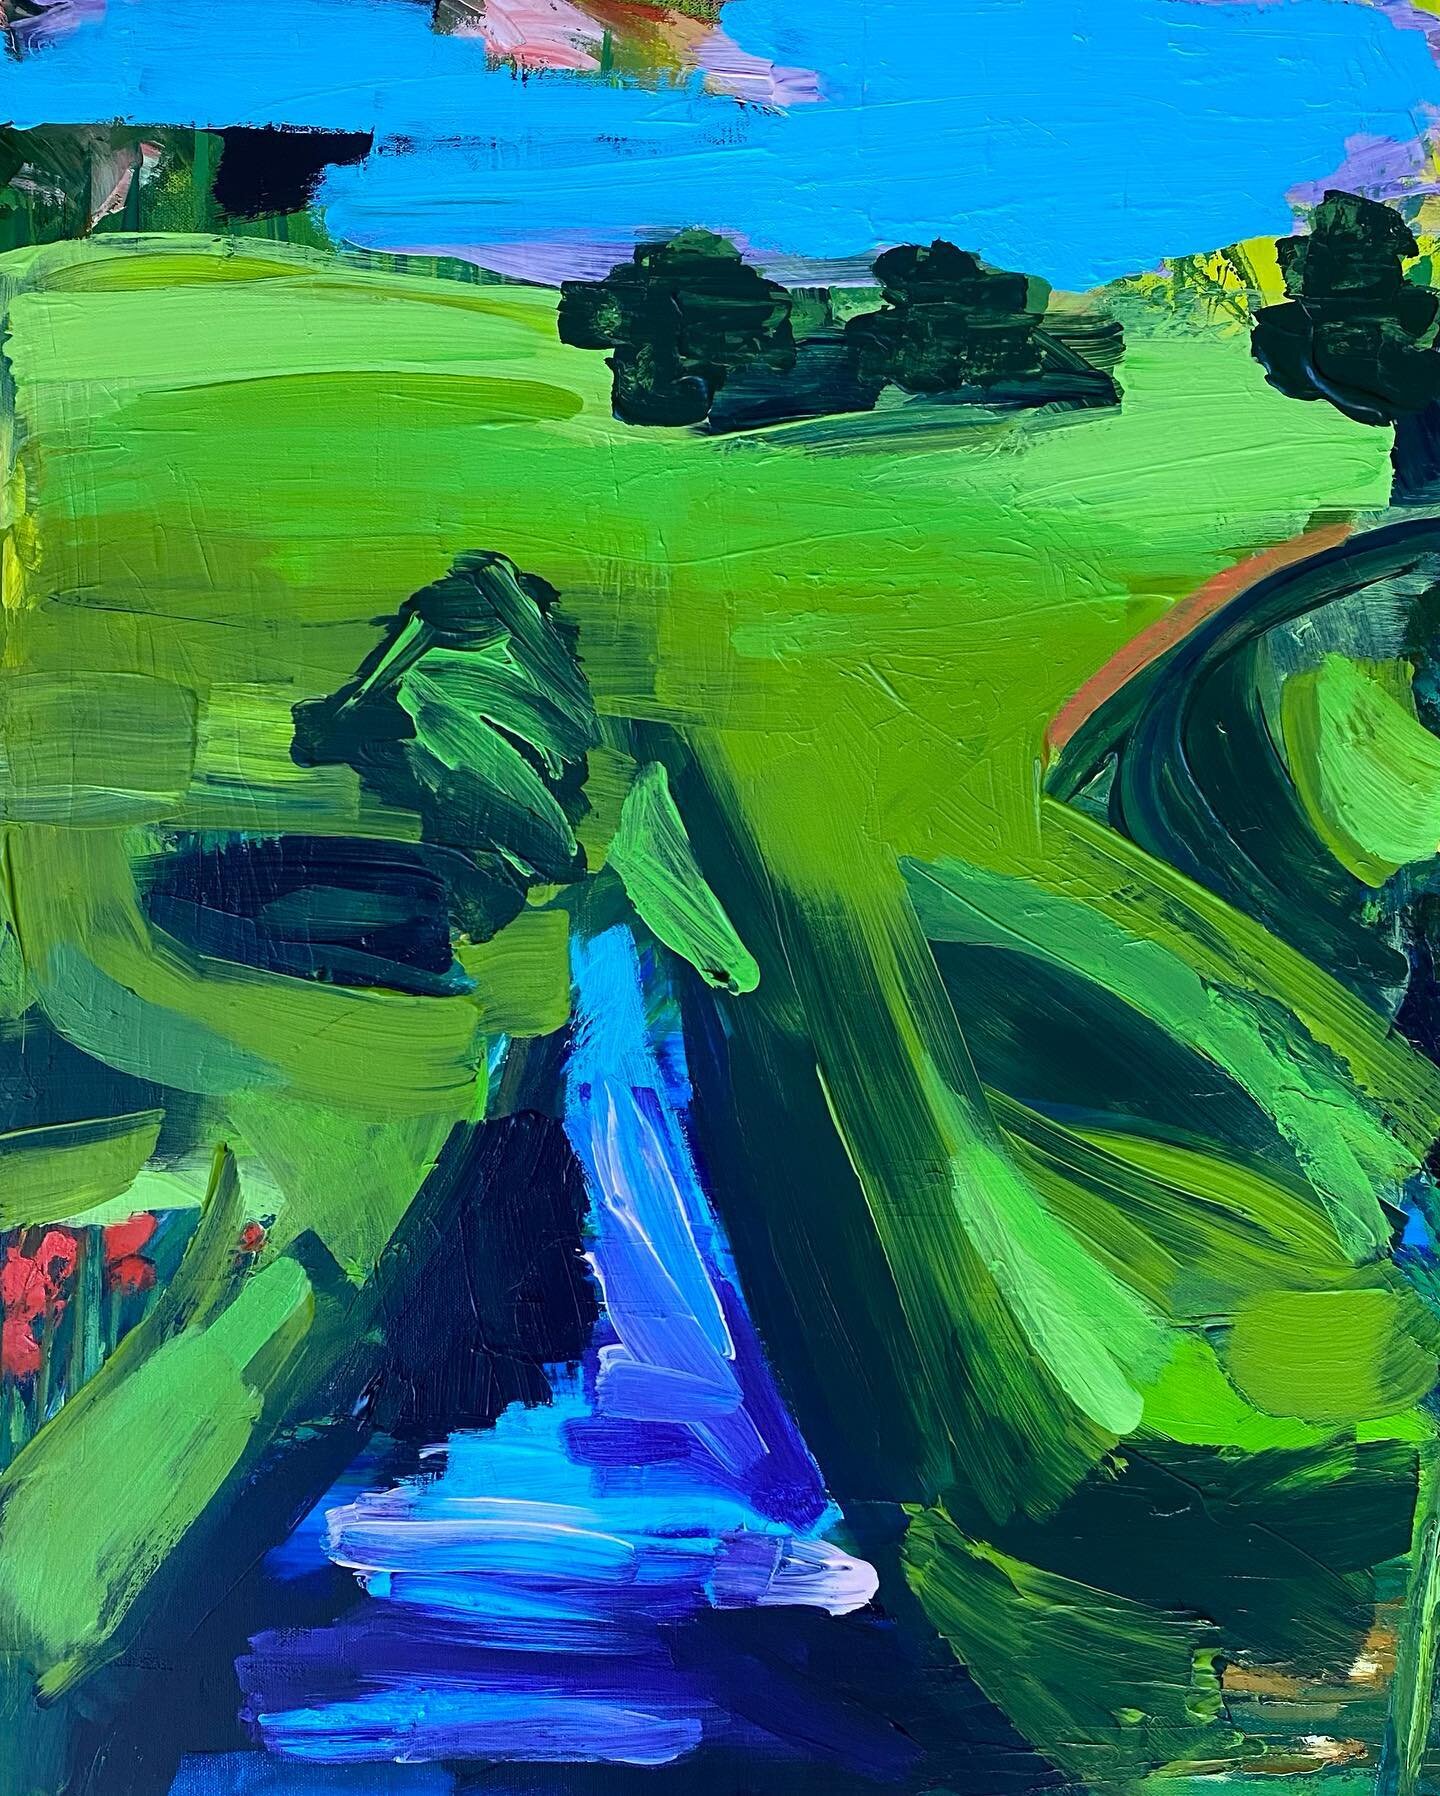 Rolling Hills
40 x 30
Acrylic on repurposed canvas
Semi- abstract